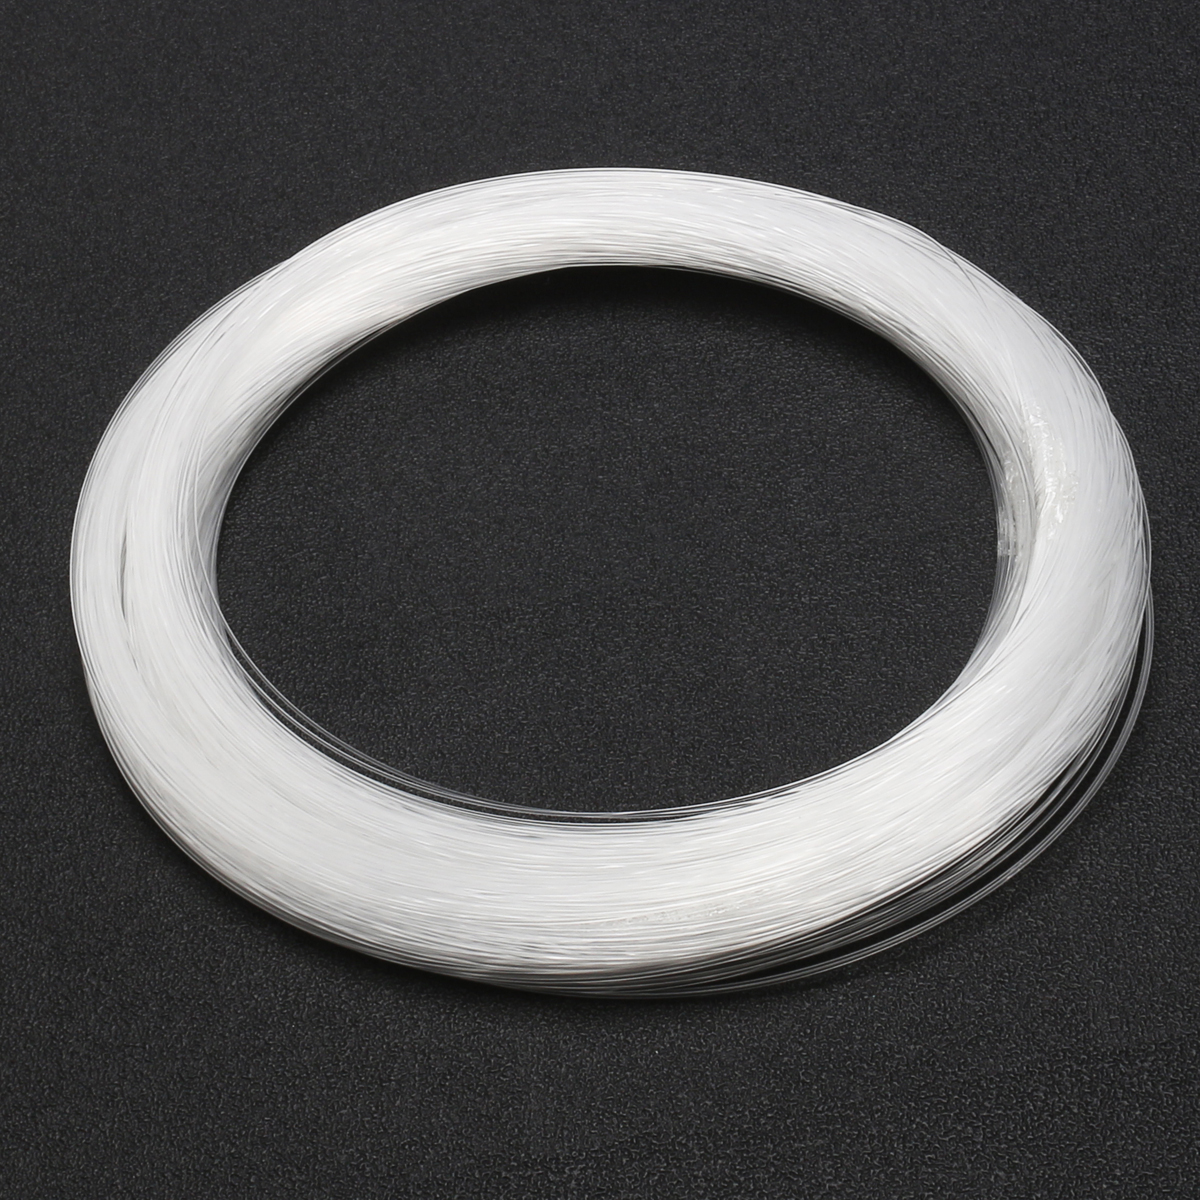 075mm-300mRoll-PMMA-Plastic-End-Glow-Fiber-Optic-Cable-For-Star-Sky-Ceiling-LED-Light-1225461